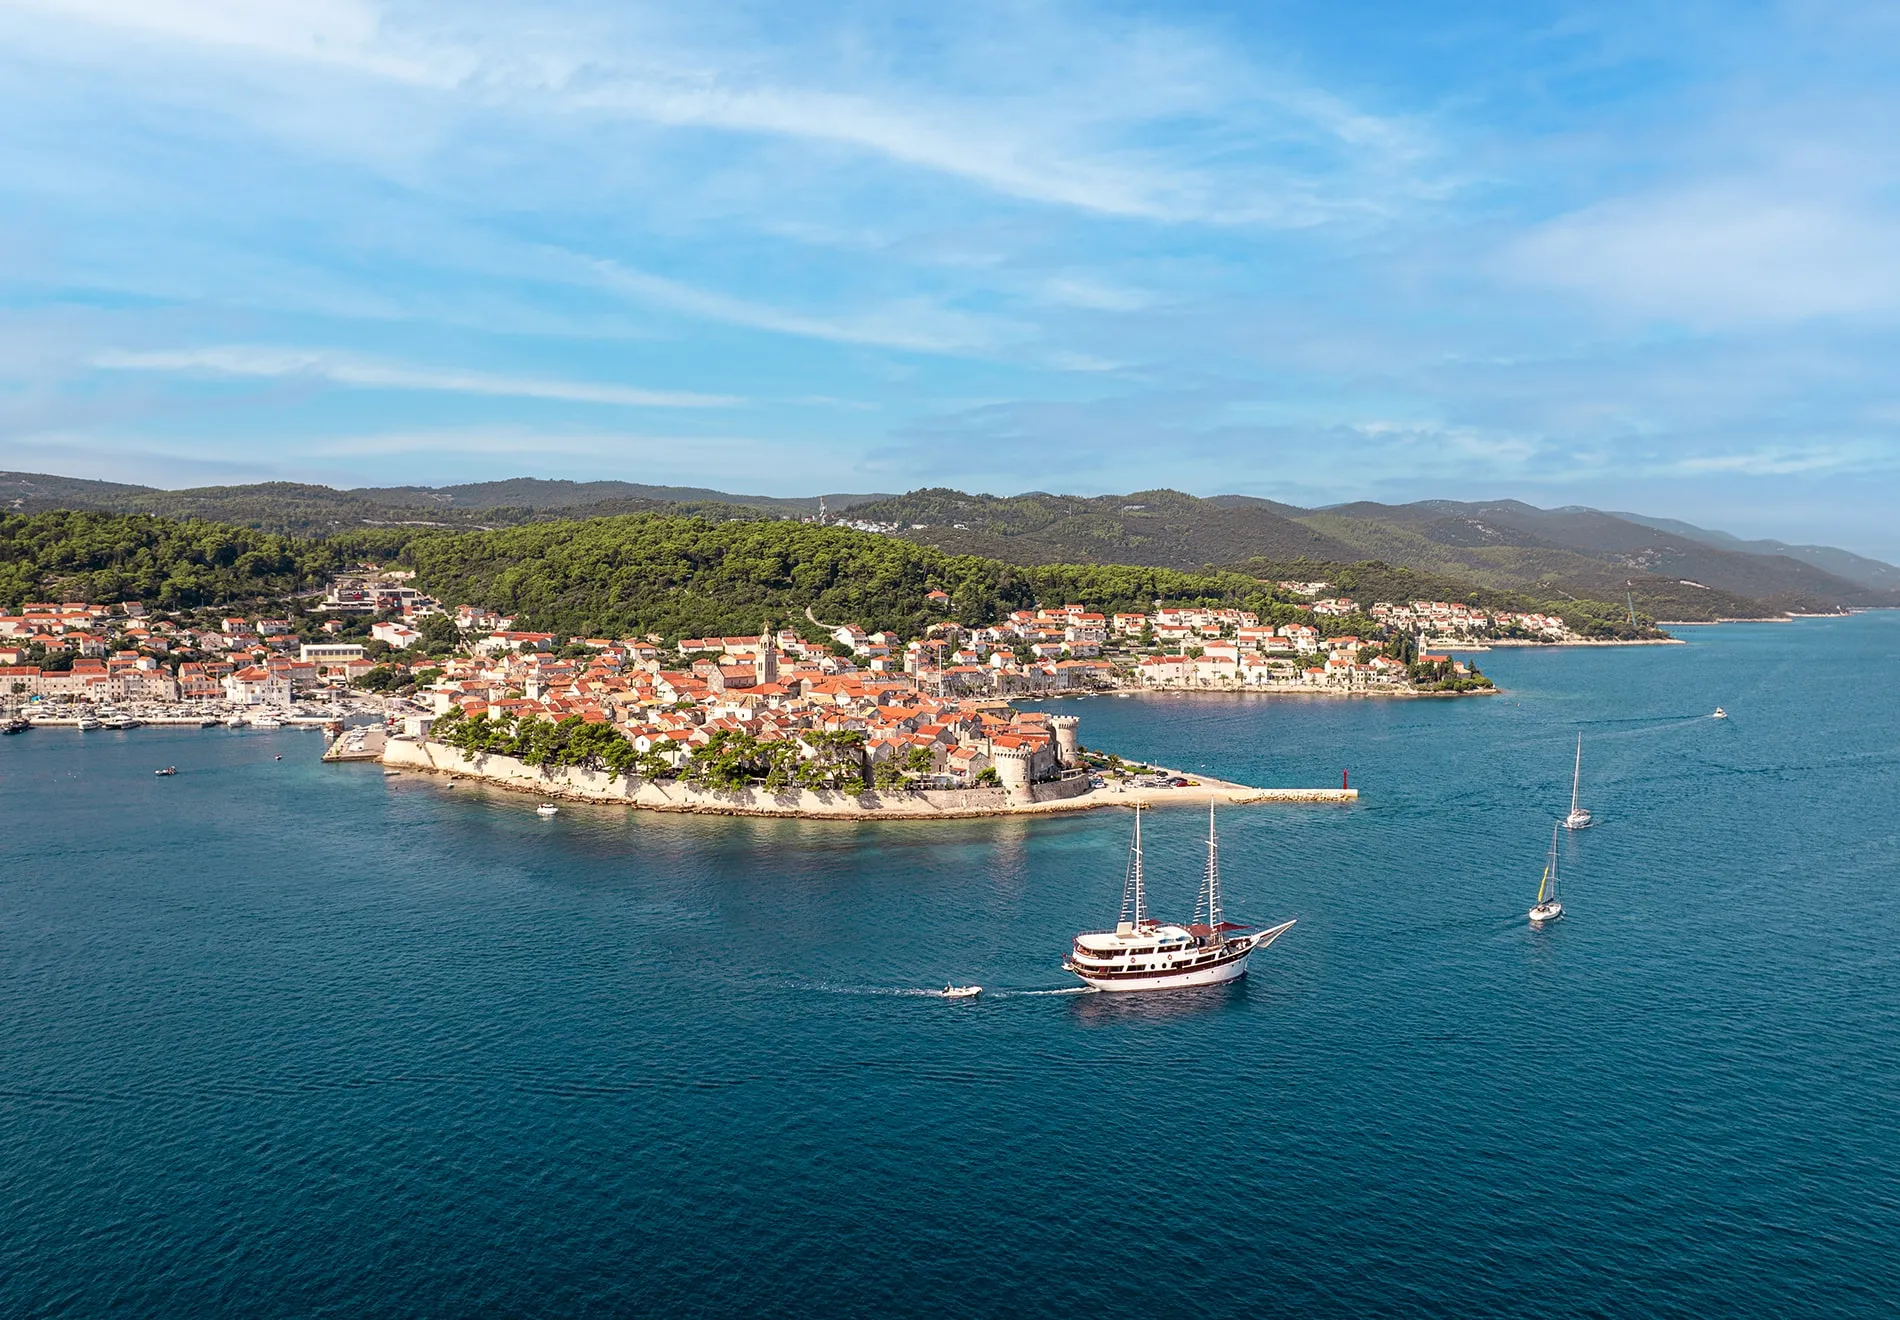 Which excursions or tours in Croatia do you recommend to your guests